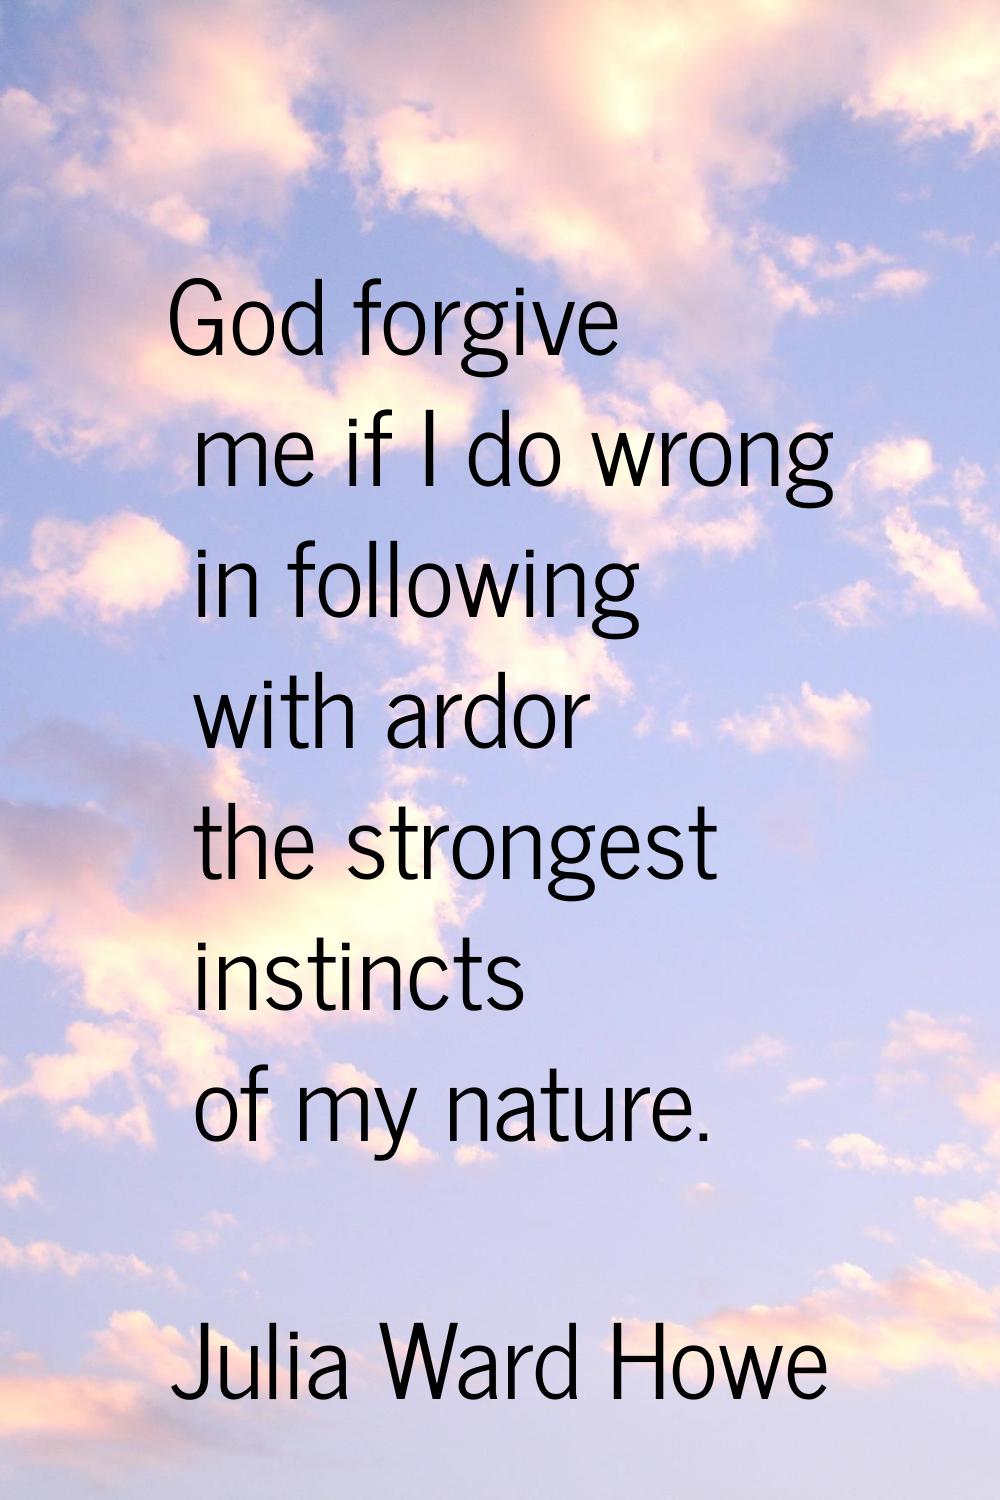 God forgive me if I do wrong in following with ardor the strongest instincts of my nature.